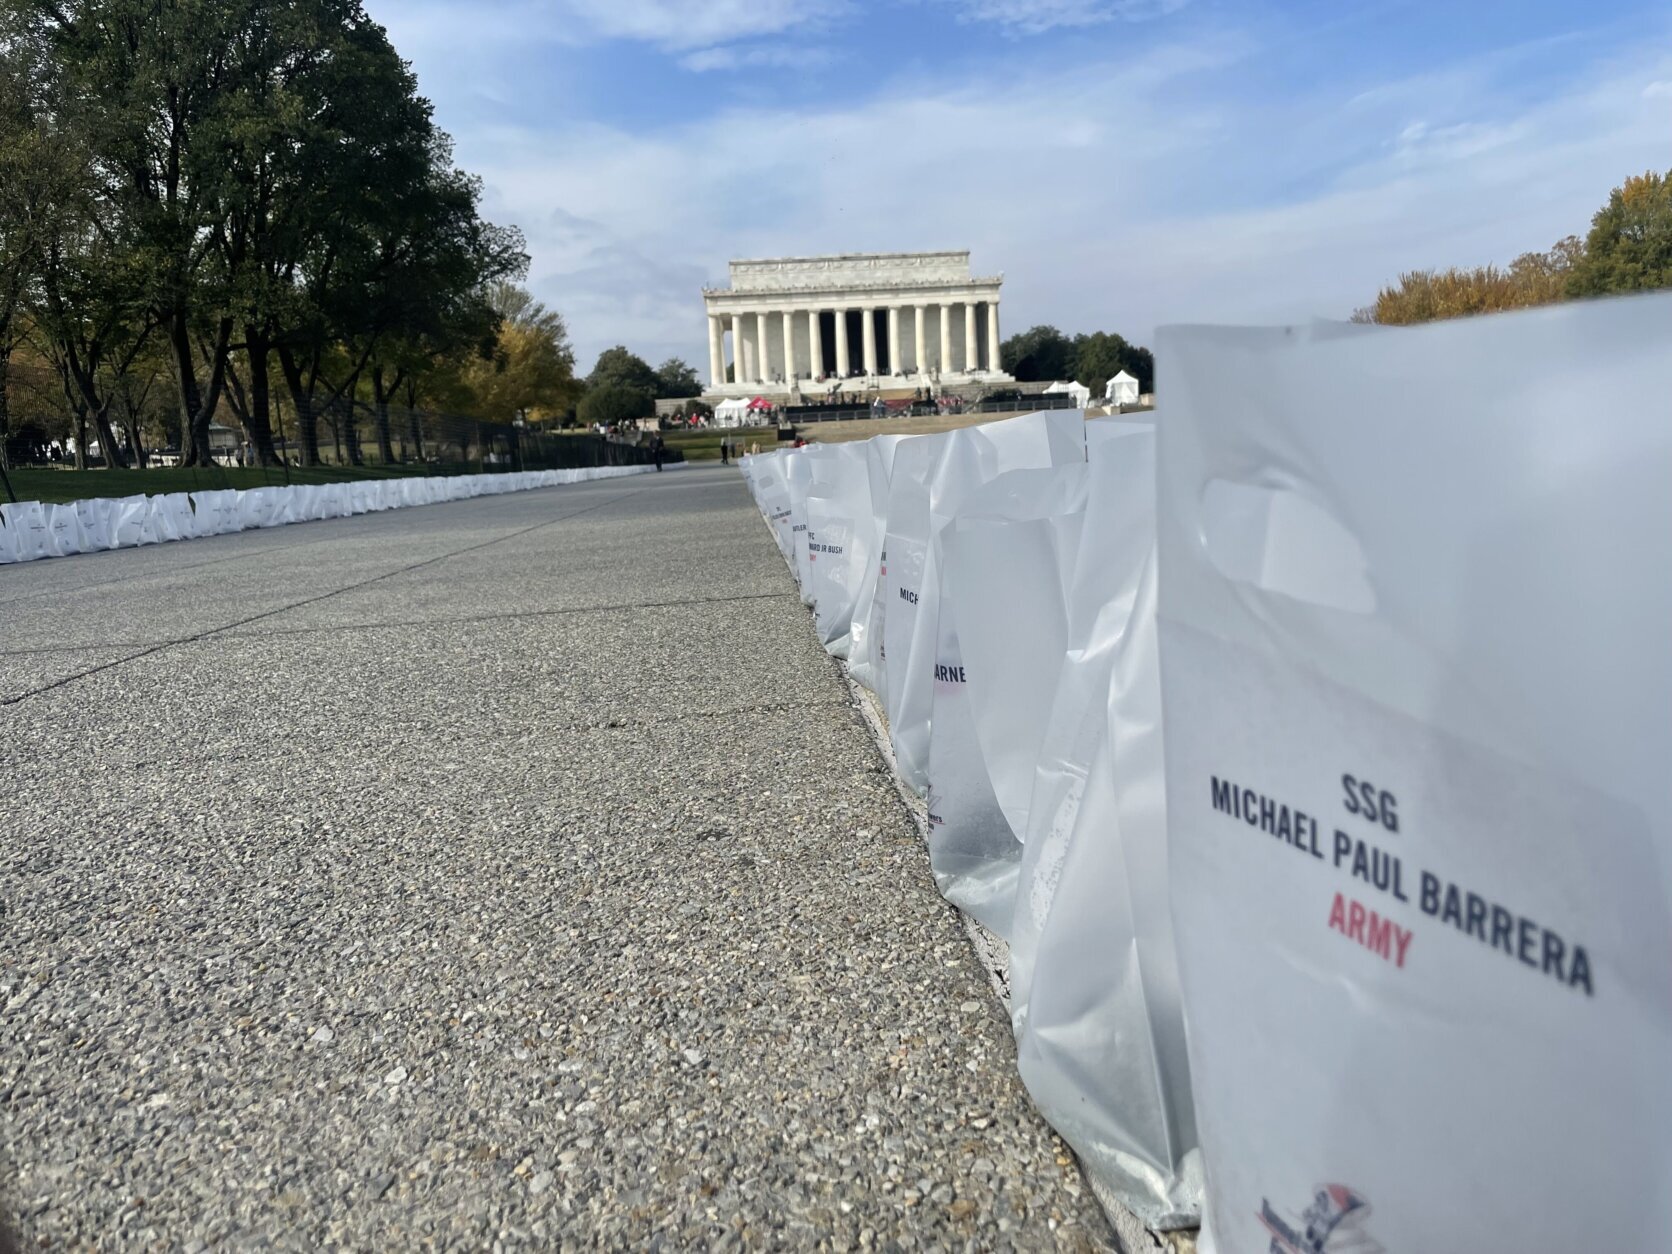 The event was organized by the Tunnels to Towers Foundation. Organizers lined each 7,070 service member’s name in small white bags along the monument’s reflecting pool.